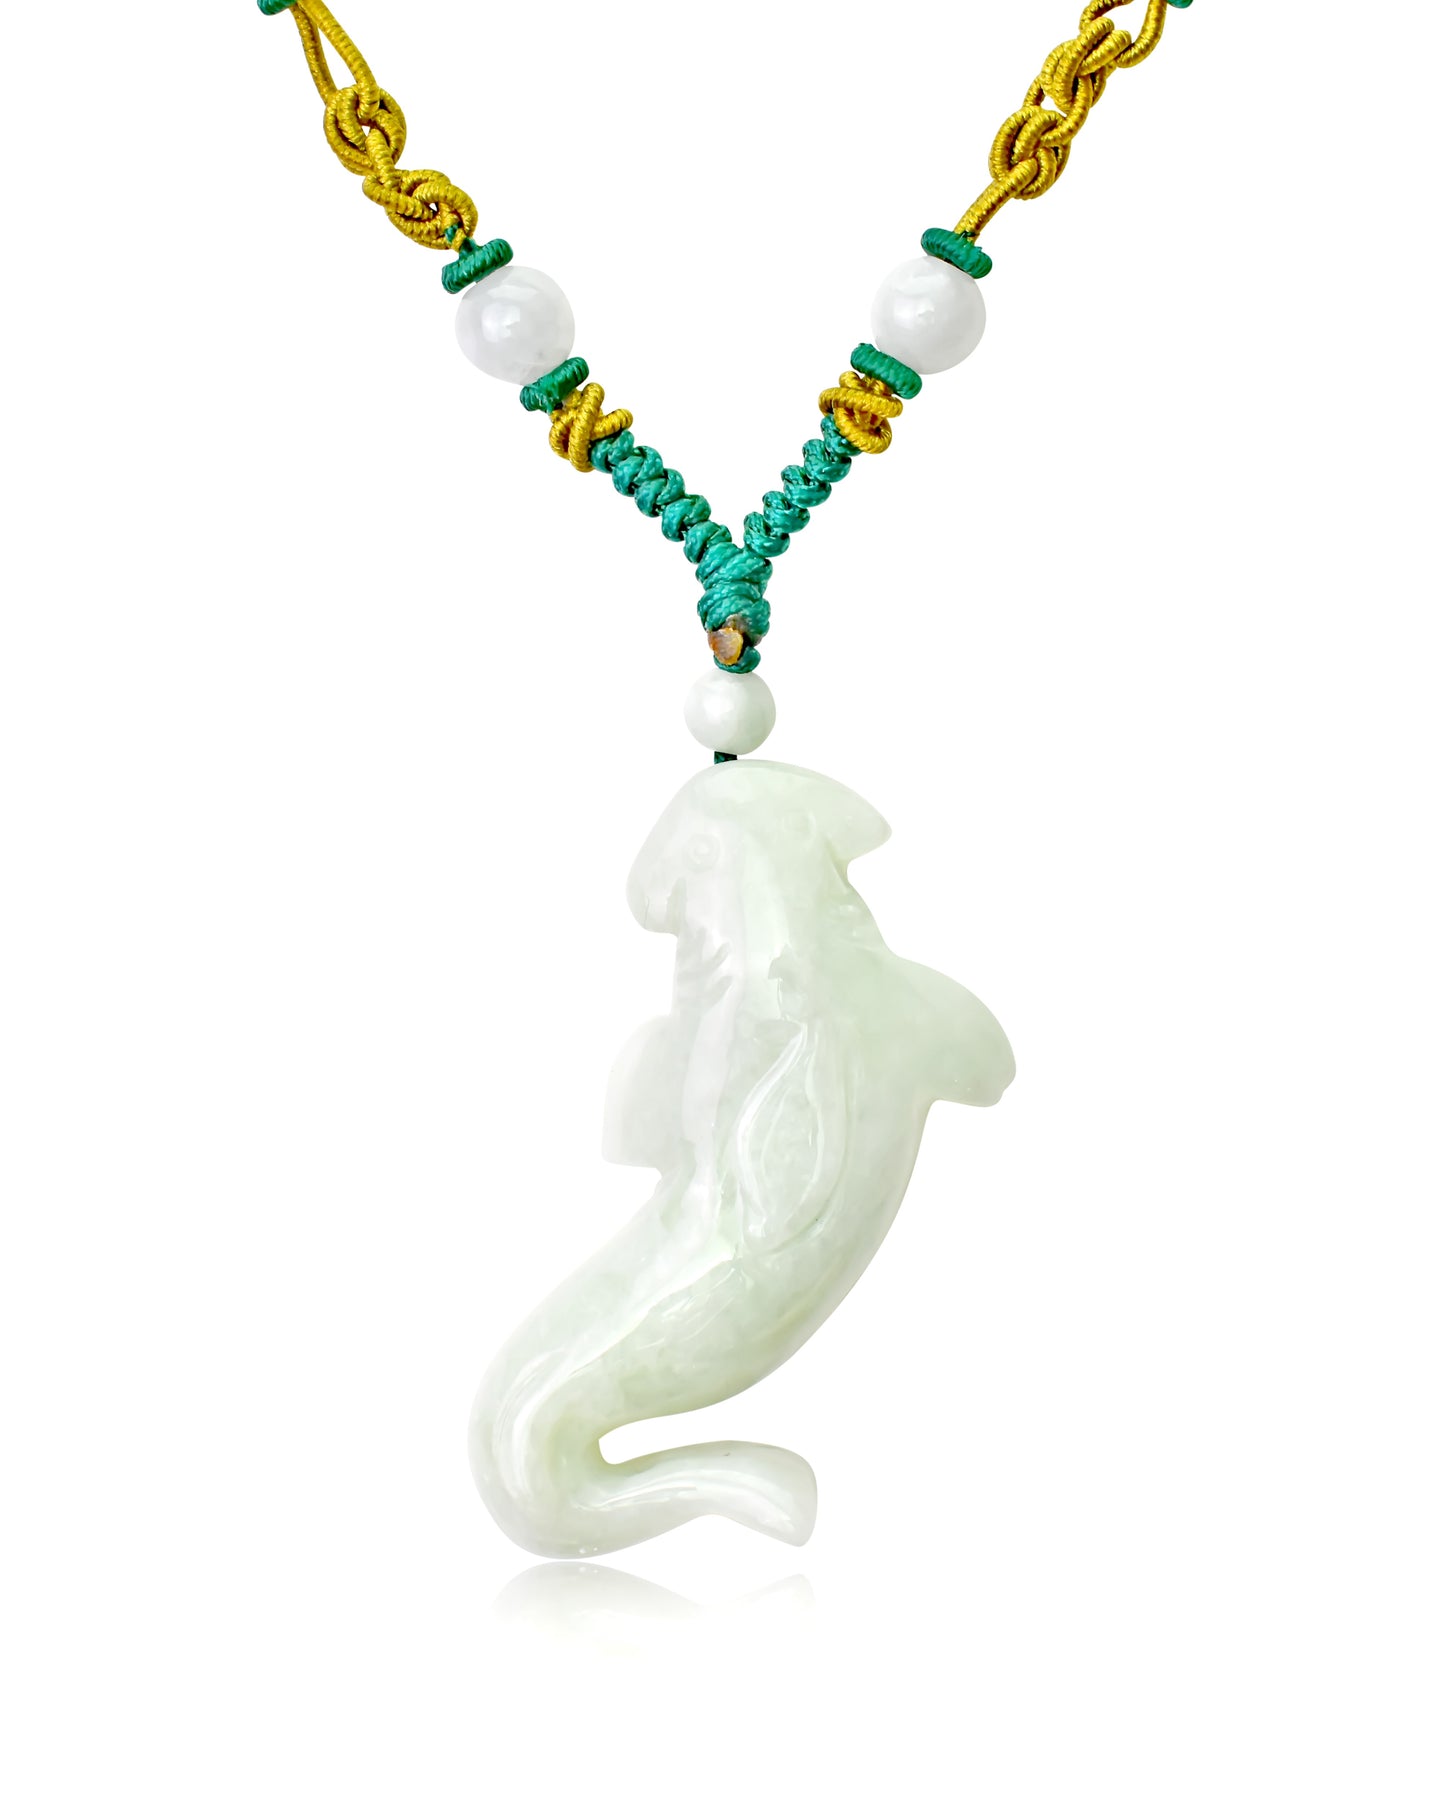 Add a Little Edge to Your Look with Hammerhead Shark Handmade Jade Necklace